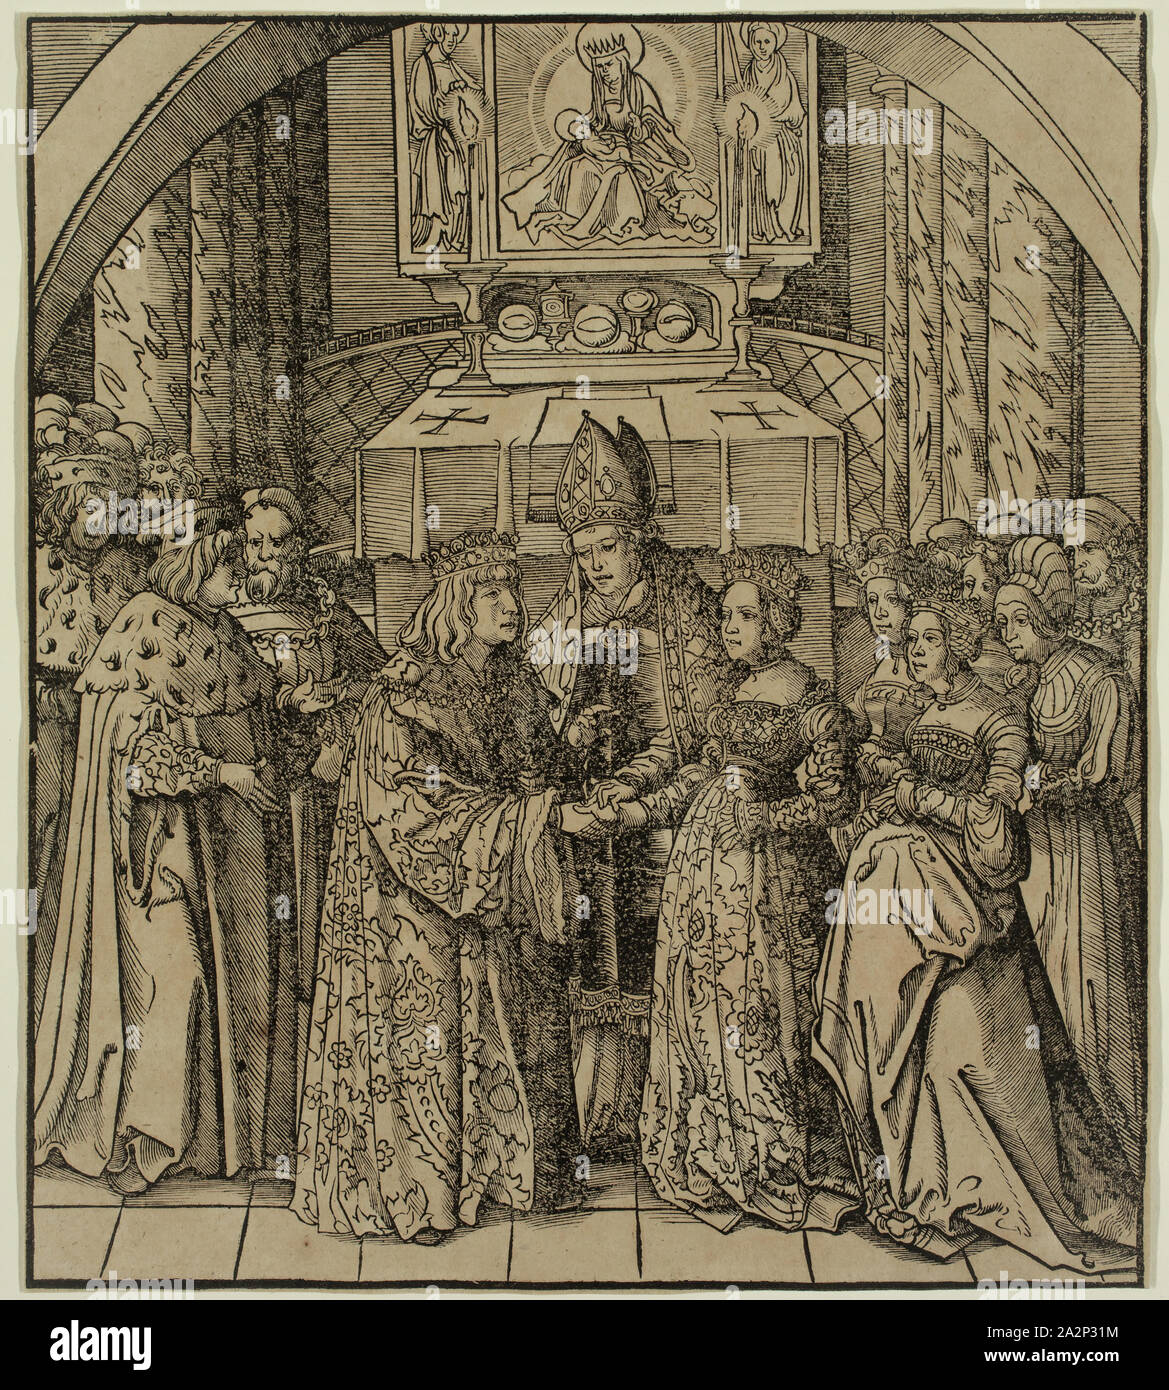 Leonhard Beck, German, 1480-1542, after Hans Burgkmair, German, 1473-1531, The Betrothal of the White King and the Daughter of the King of Feuereisen, between 1513 and 1518, woodcut printed in black ink on laid paper, Image: 8 5/8 × 7 1/2 inches (21.9 × 19.1 cm Stock Photo